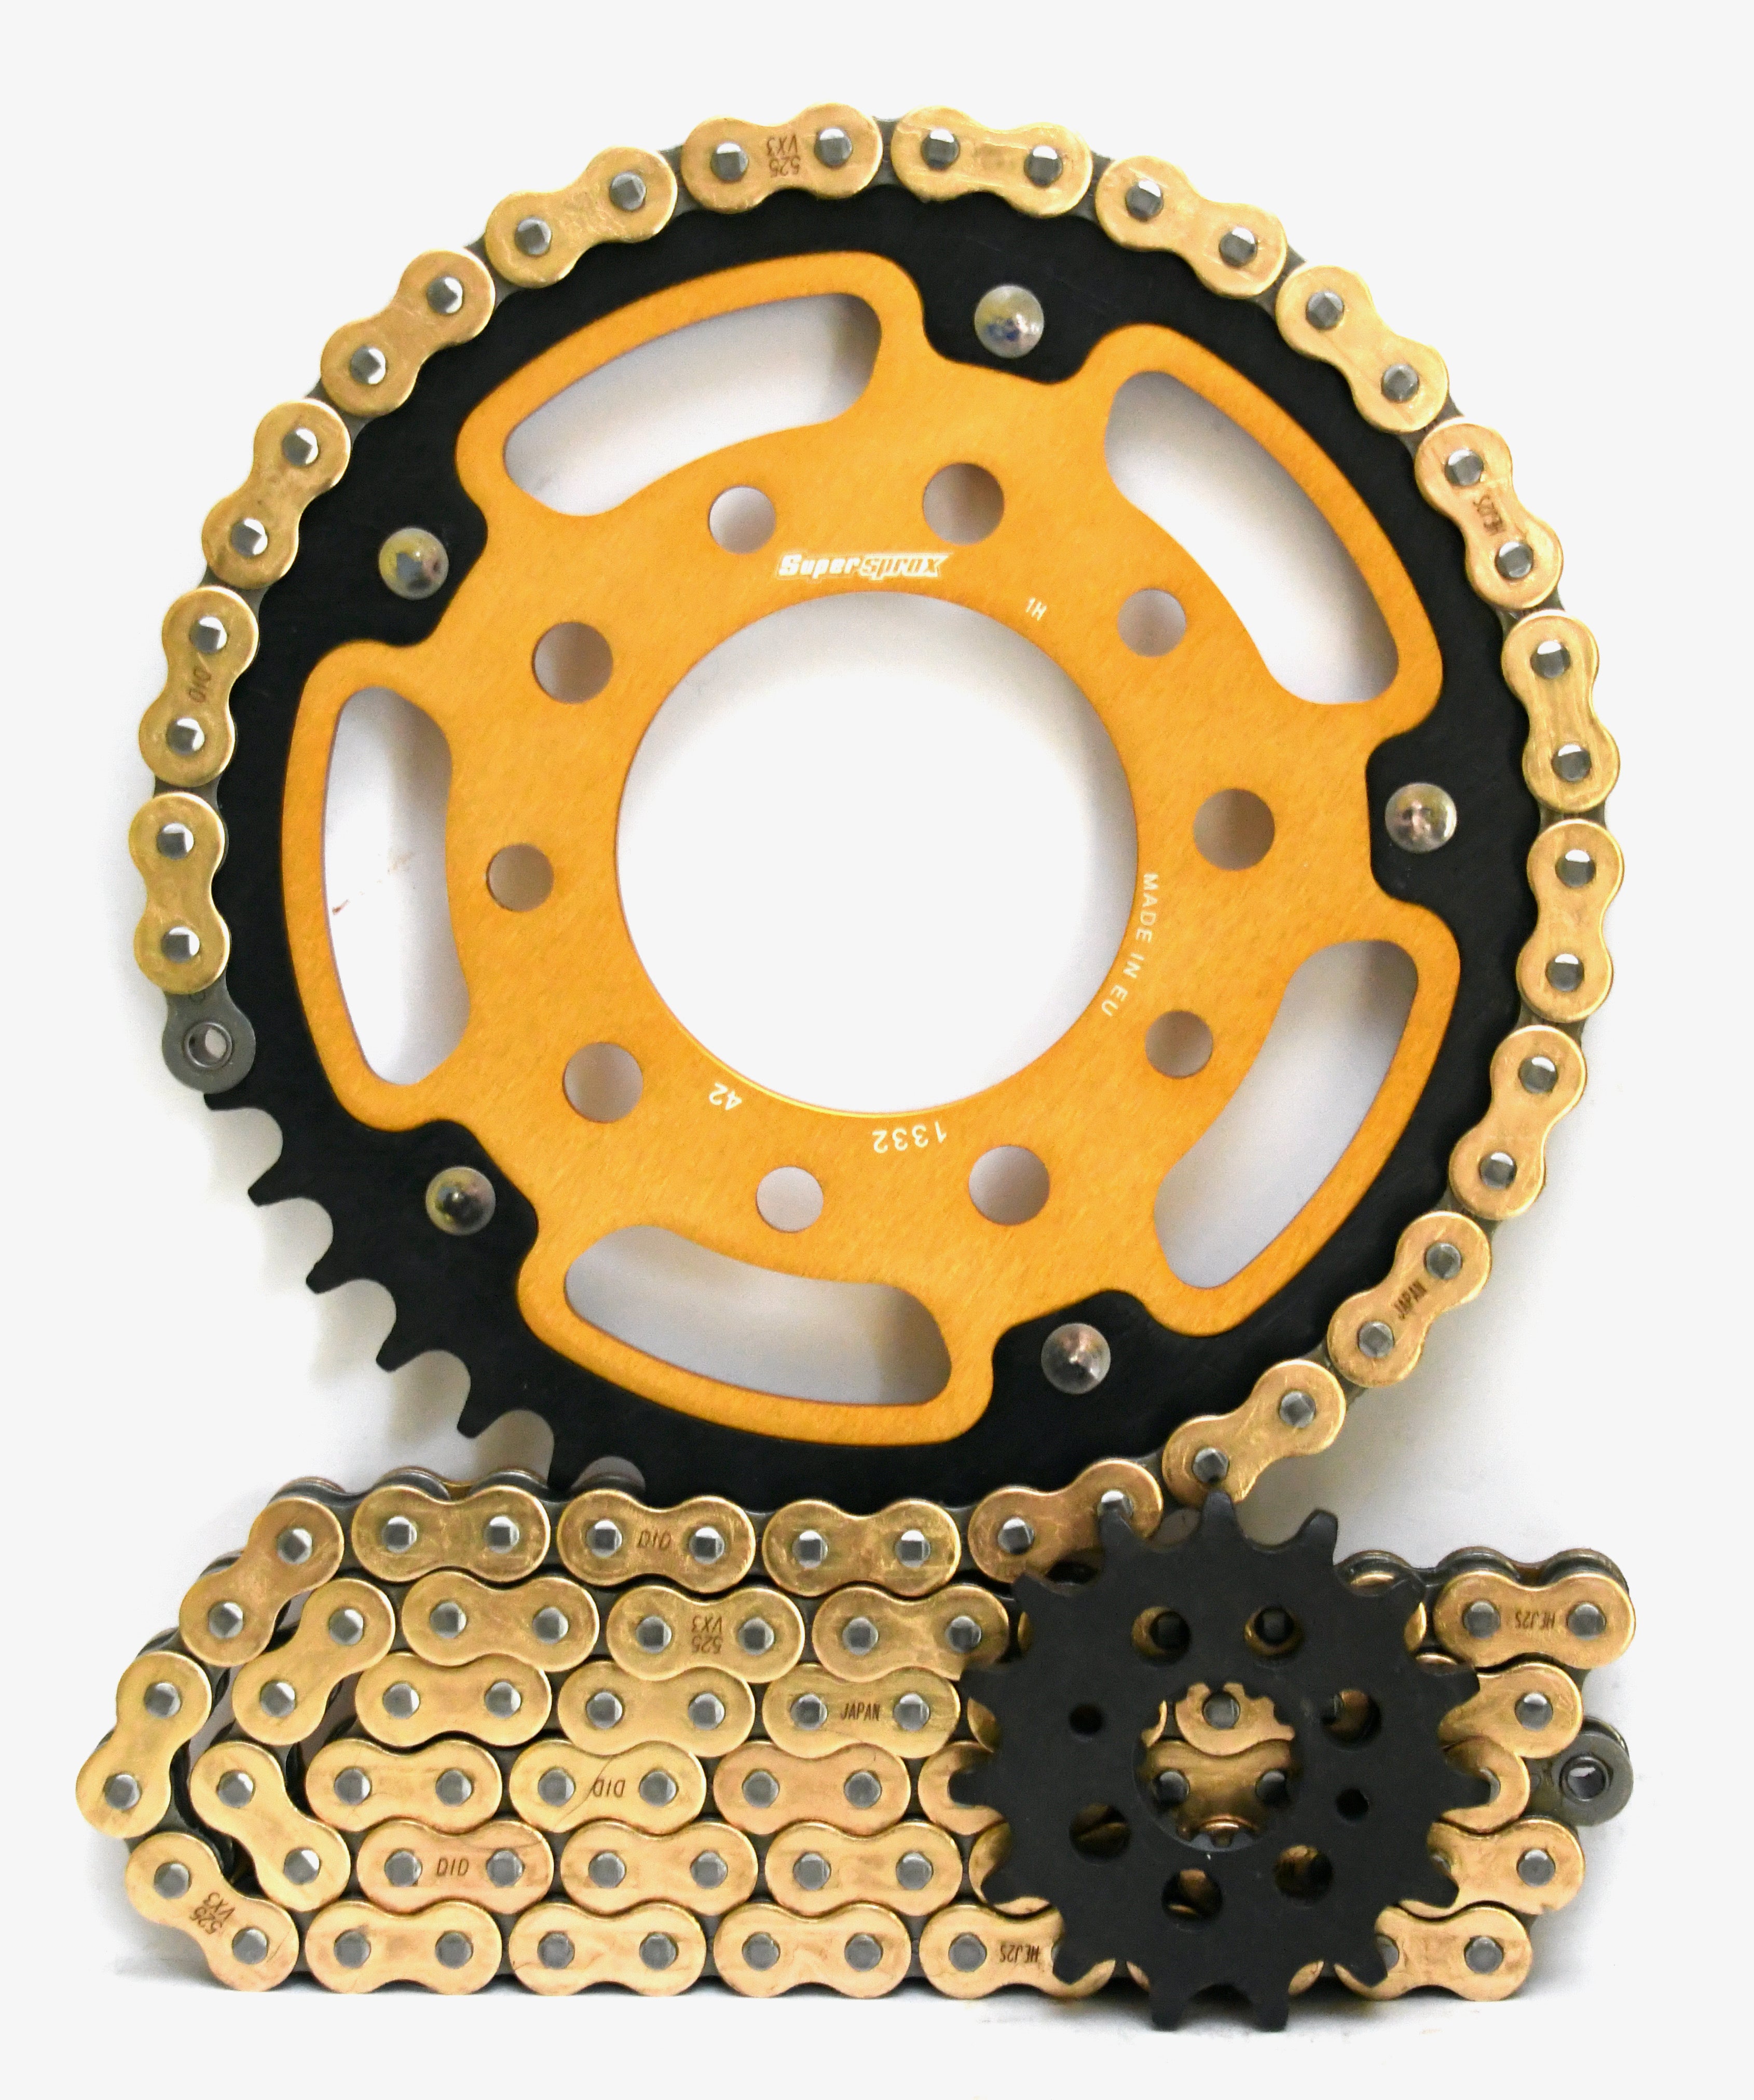 Supersprox Stealth Chain & Sprocket Kit for Triumph America 800 2002-2006 - Standard Gearing - 0